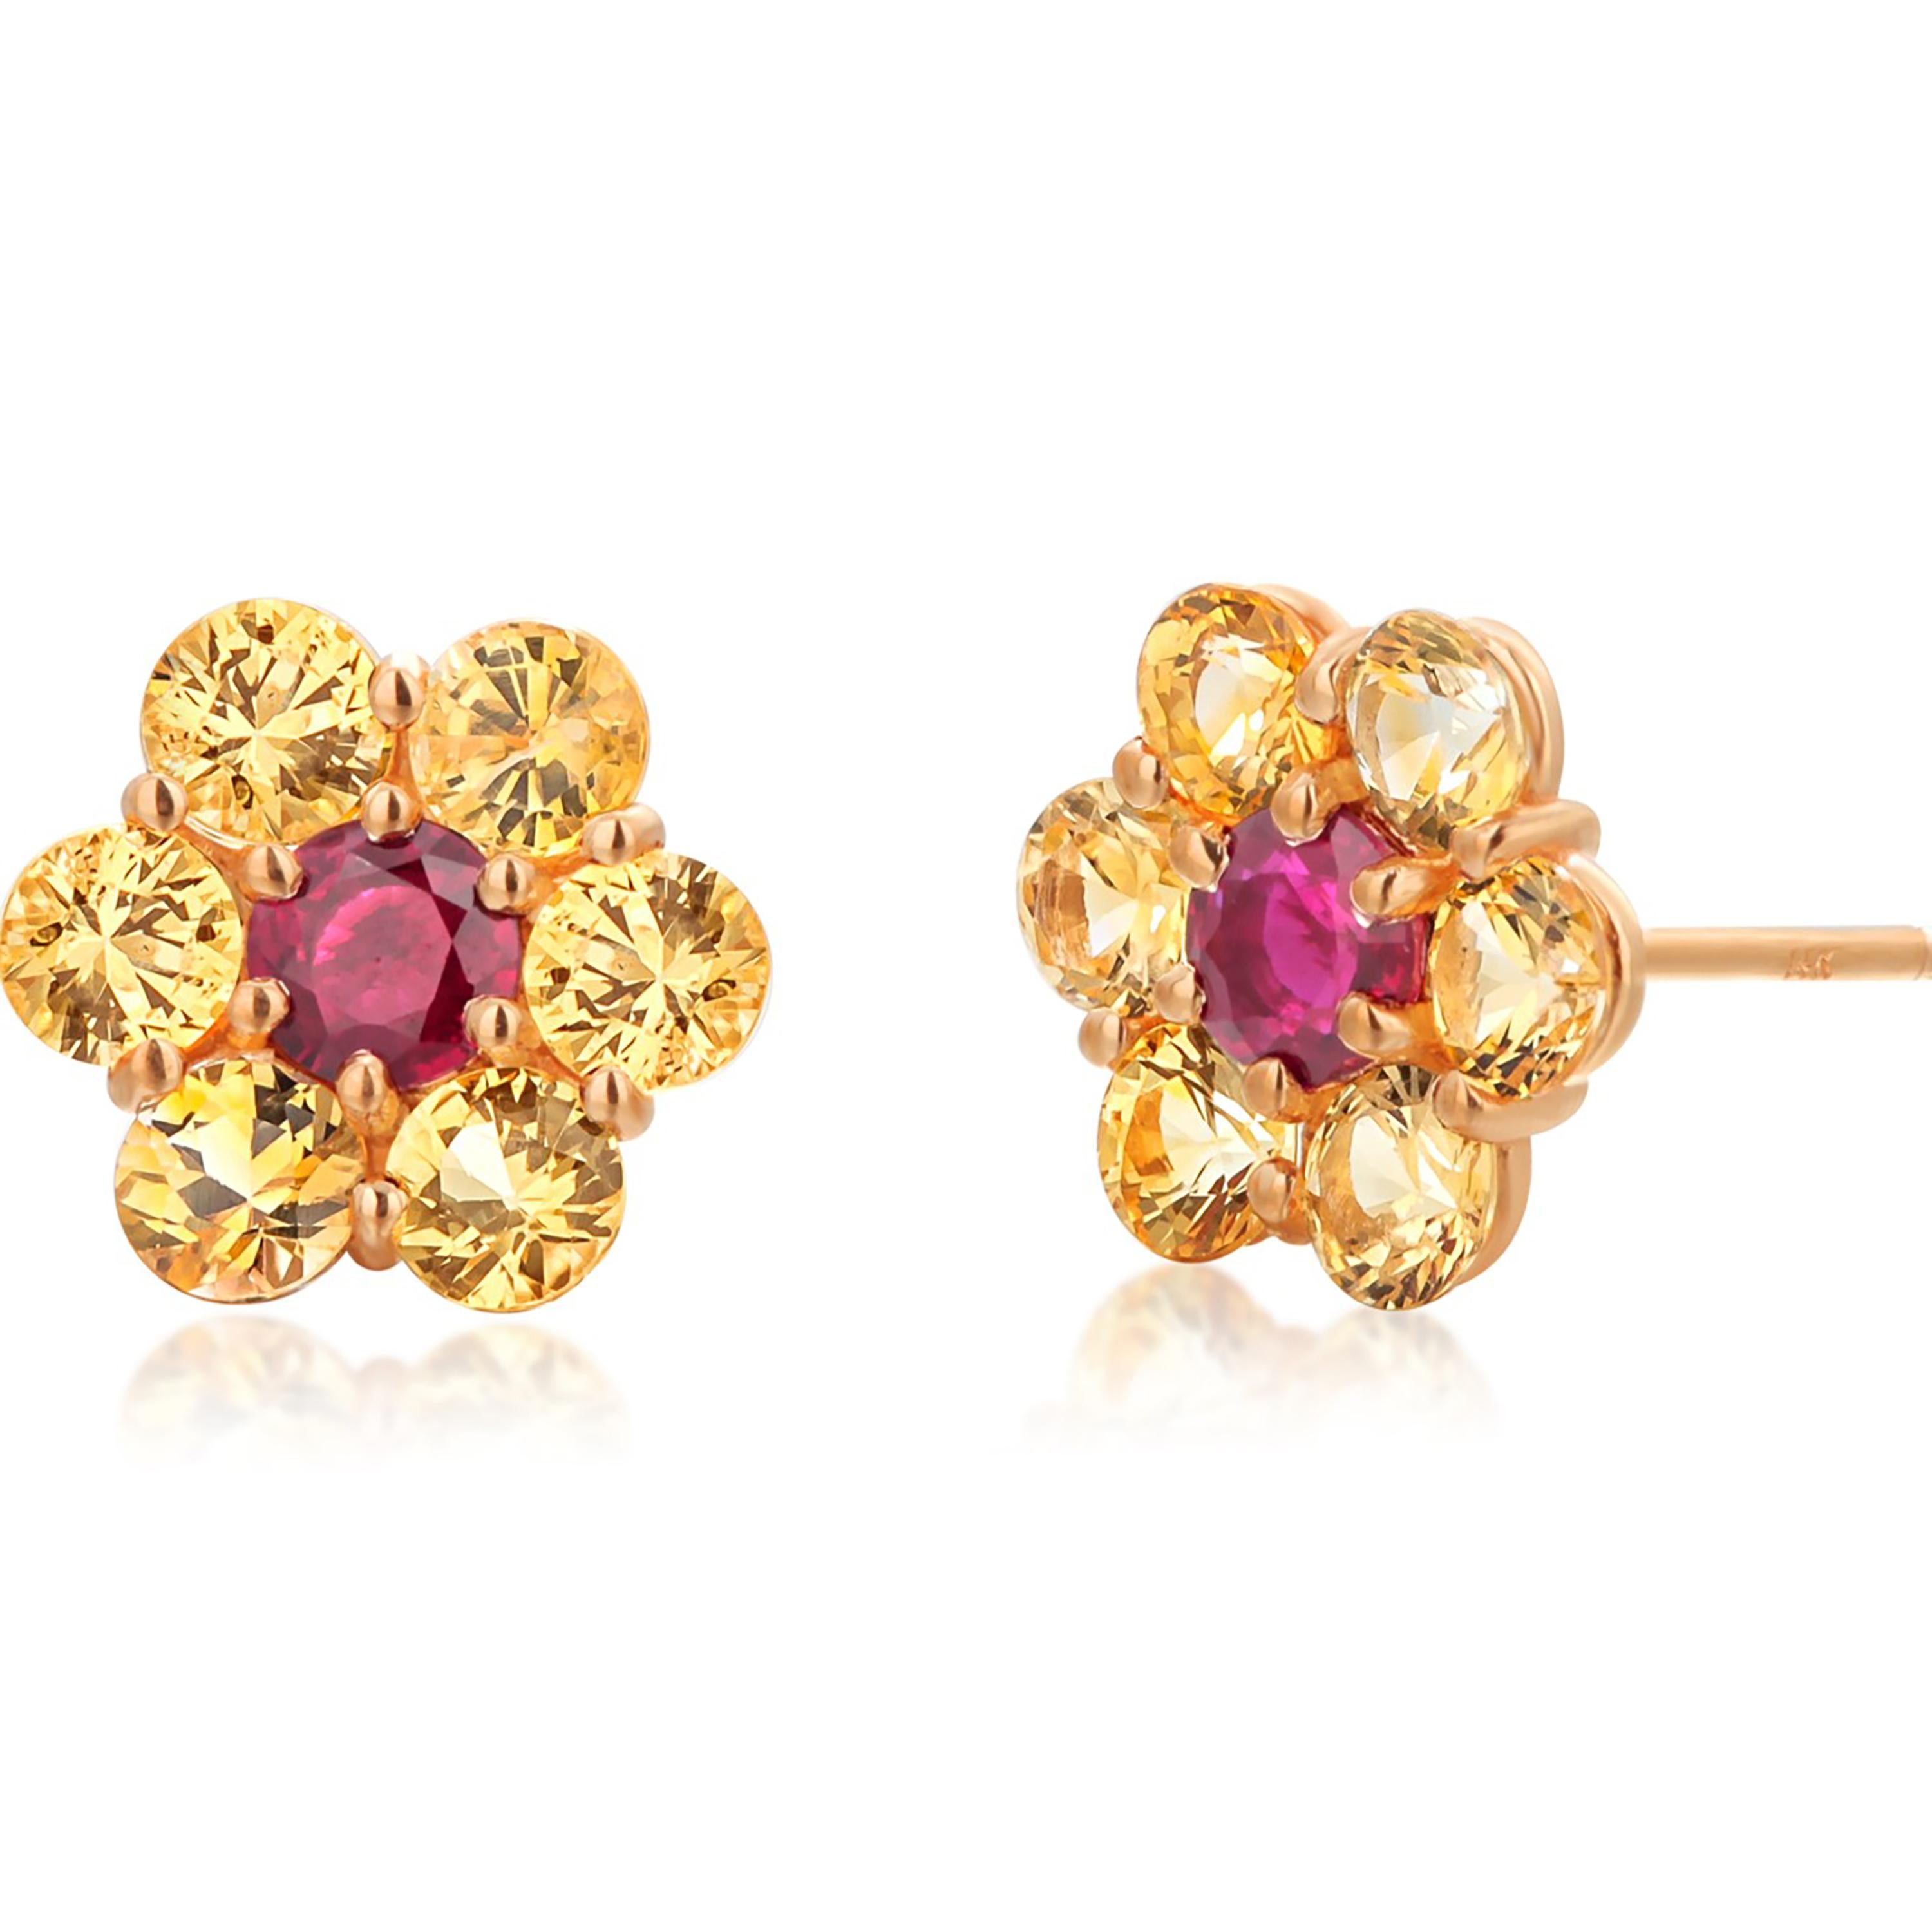 14 Karat Yellow Gold Floral Stud Earrings Yellow Ceylon Sapphires Ruby 0.35 Inch In New Condition For Sale In New York, NY